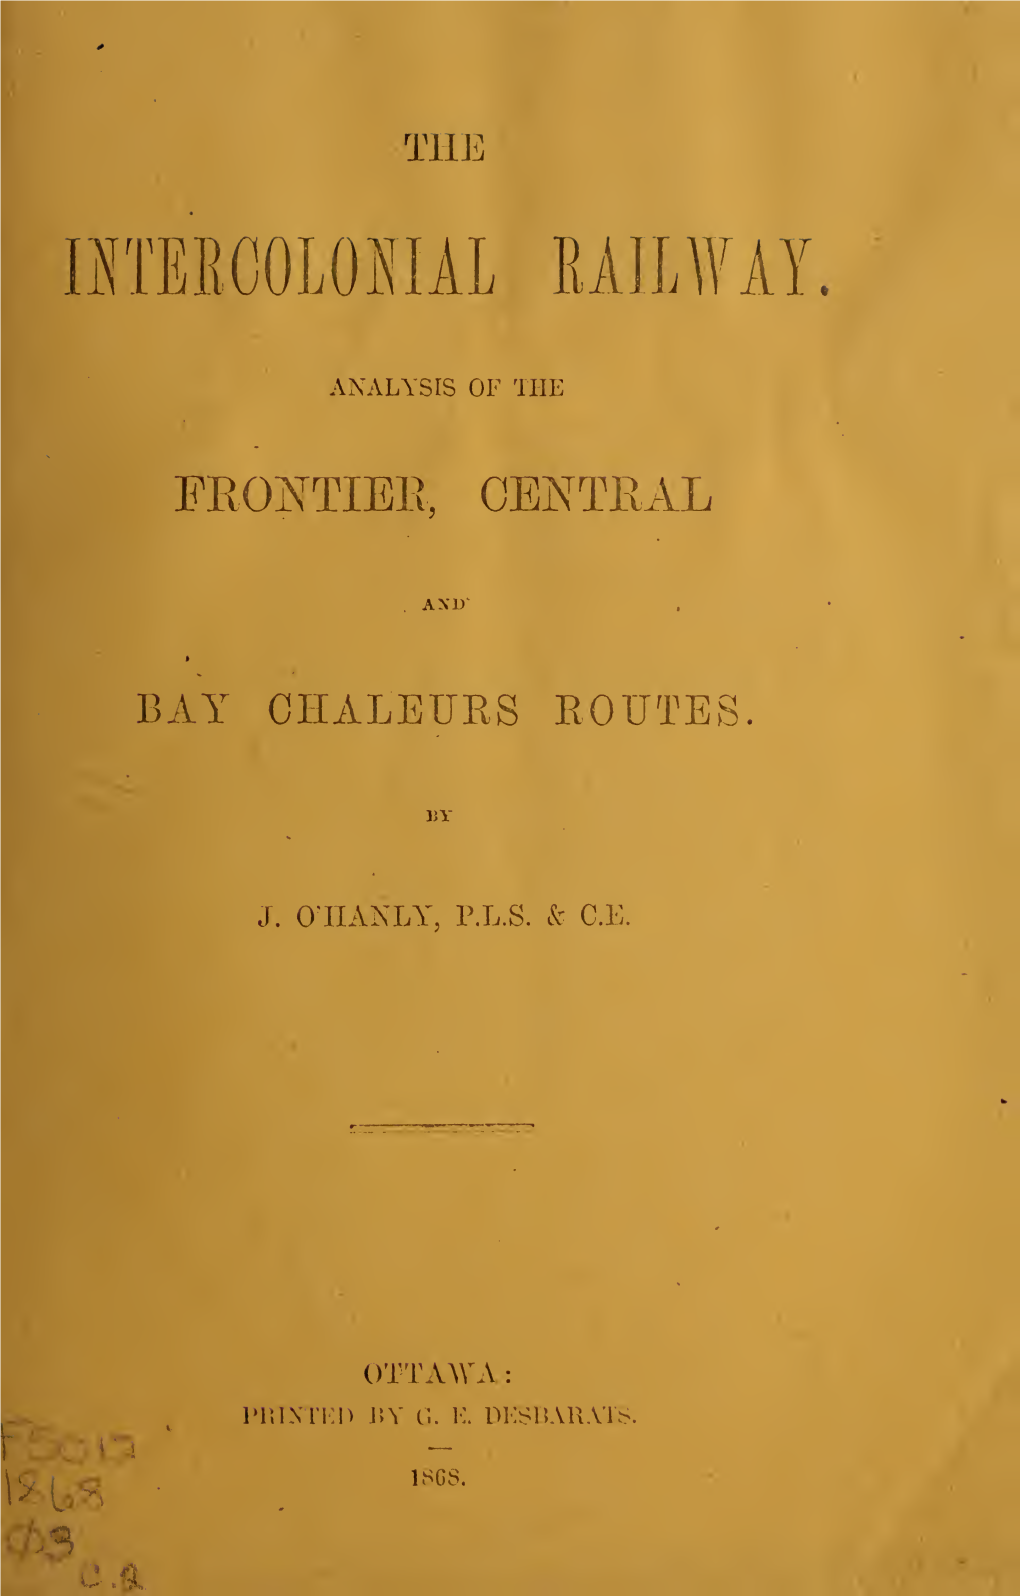 The Intercolonial Railway, Analysis of the Frontier, Central and Bay